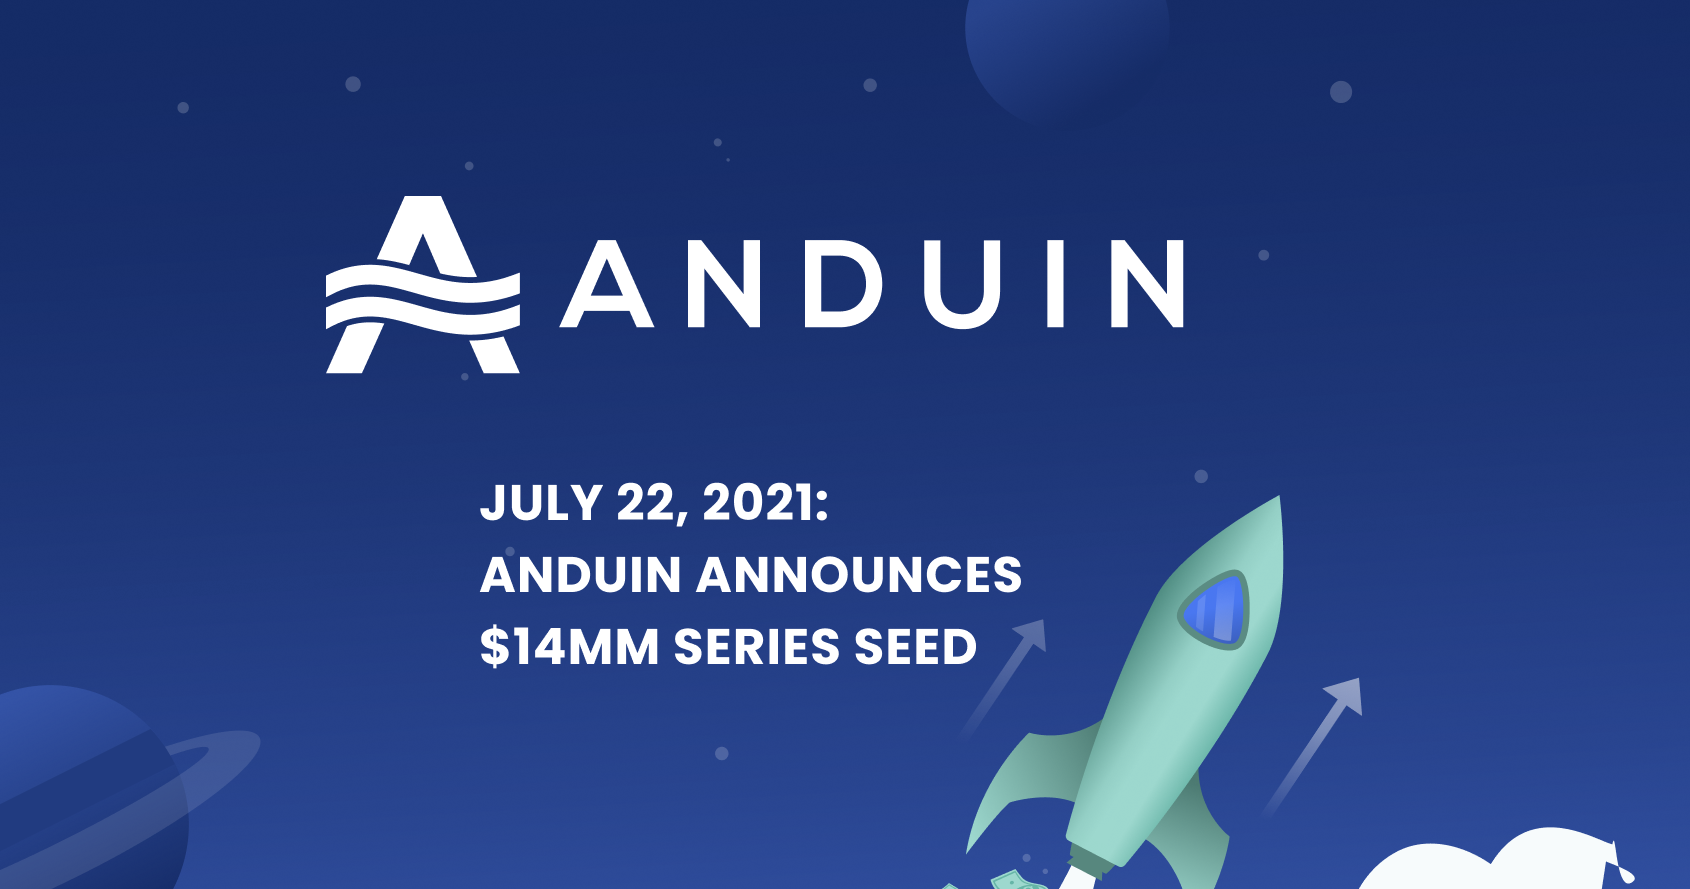 Anduin secures seed funding